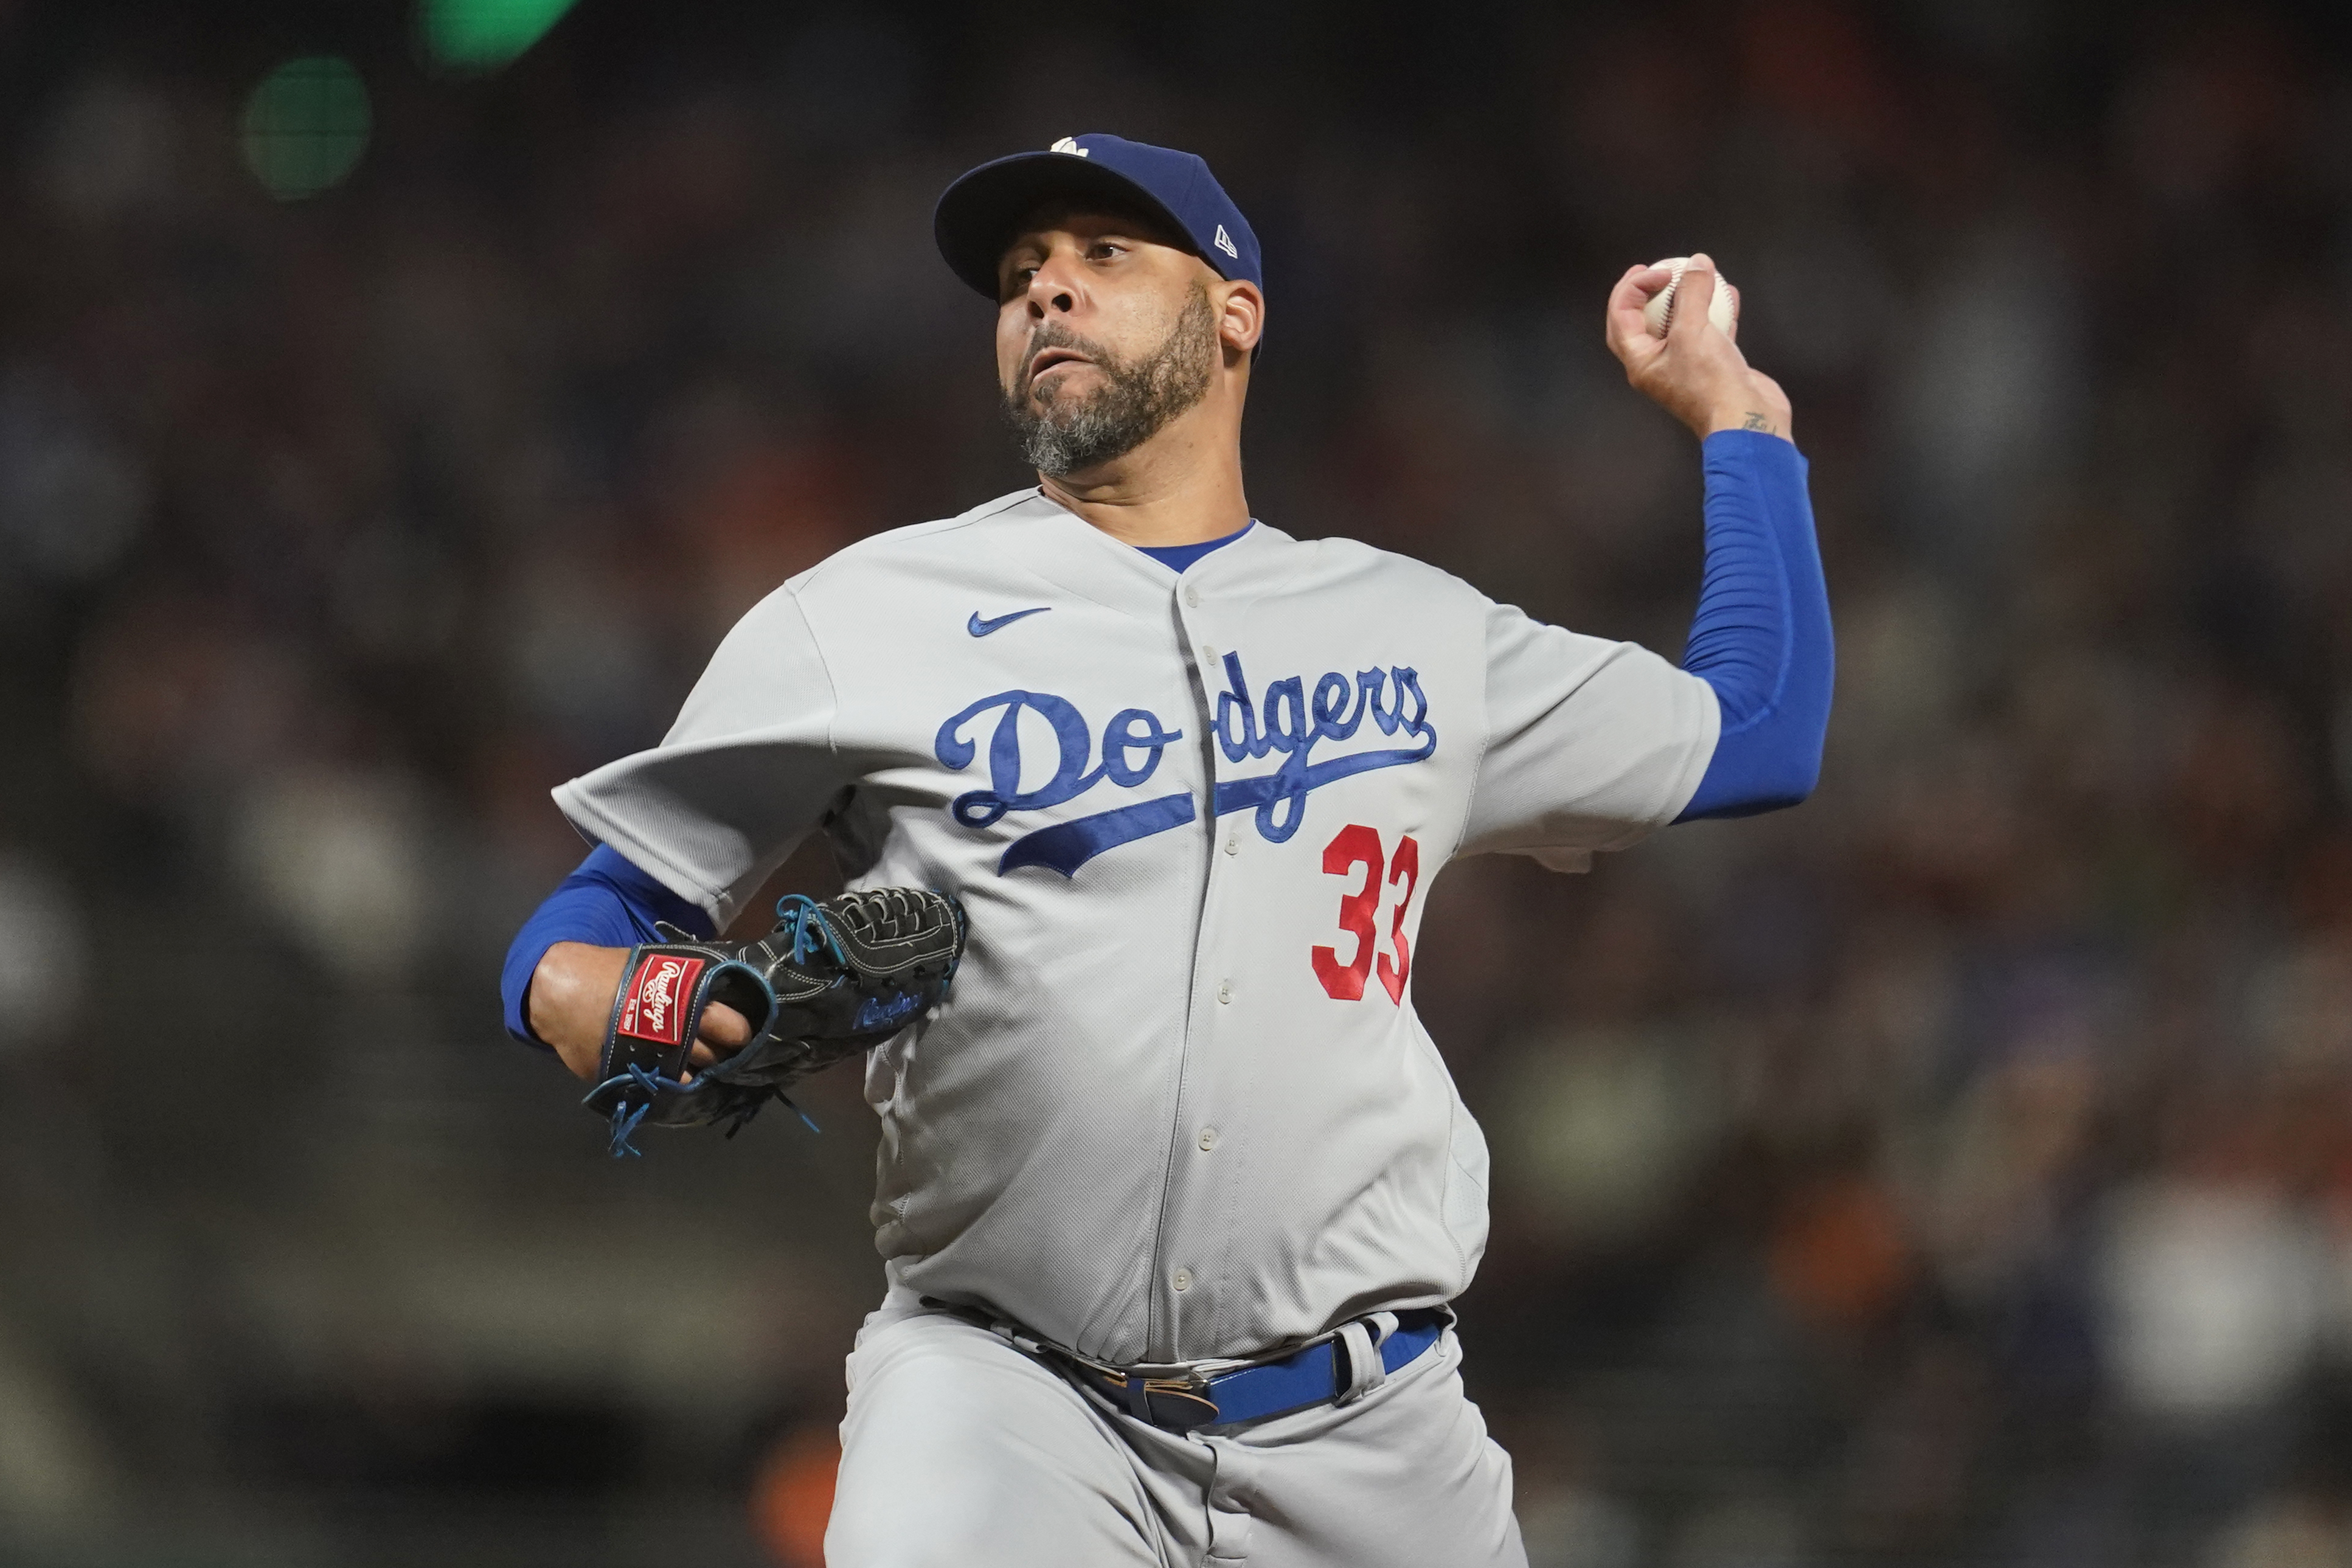 Los Angeles Dodgers: Now is the right time to trade David Price